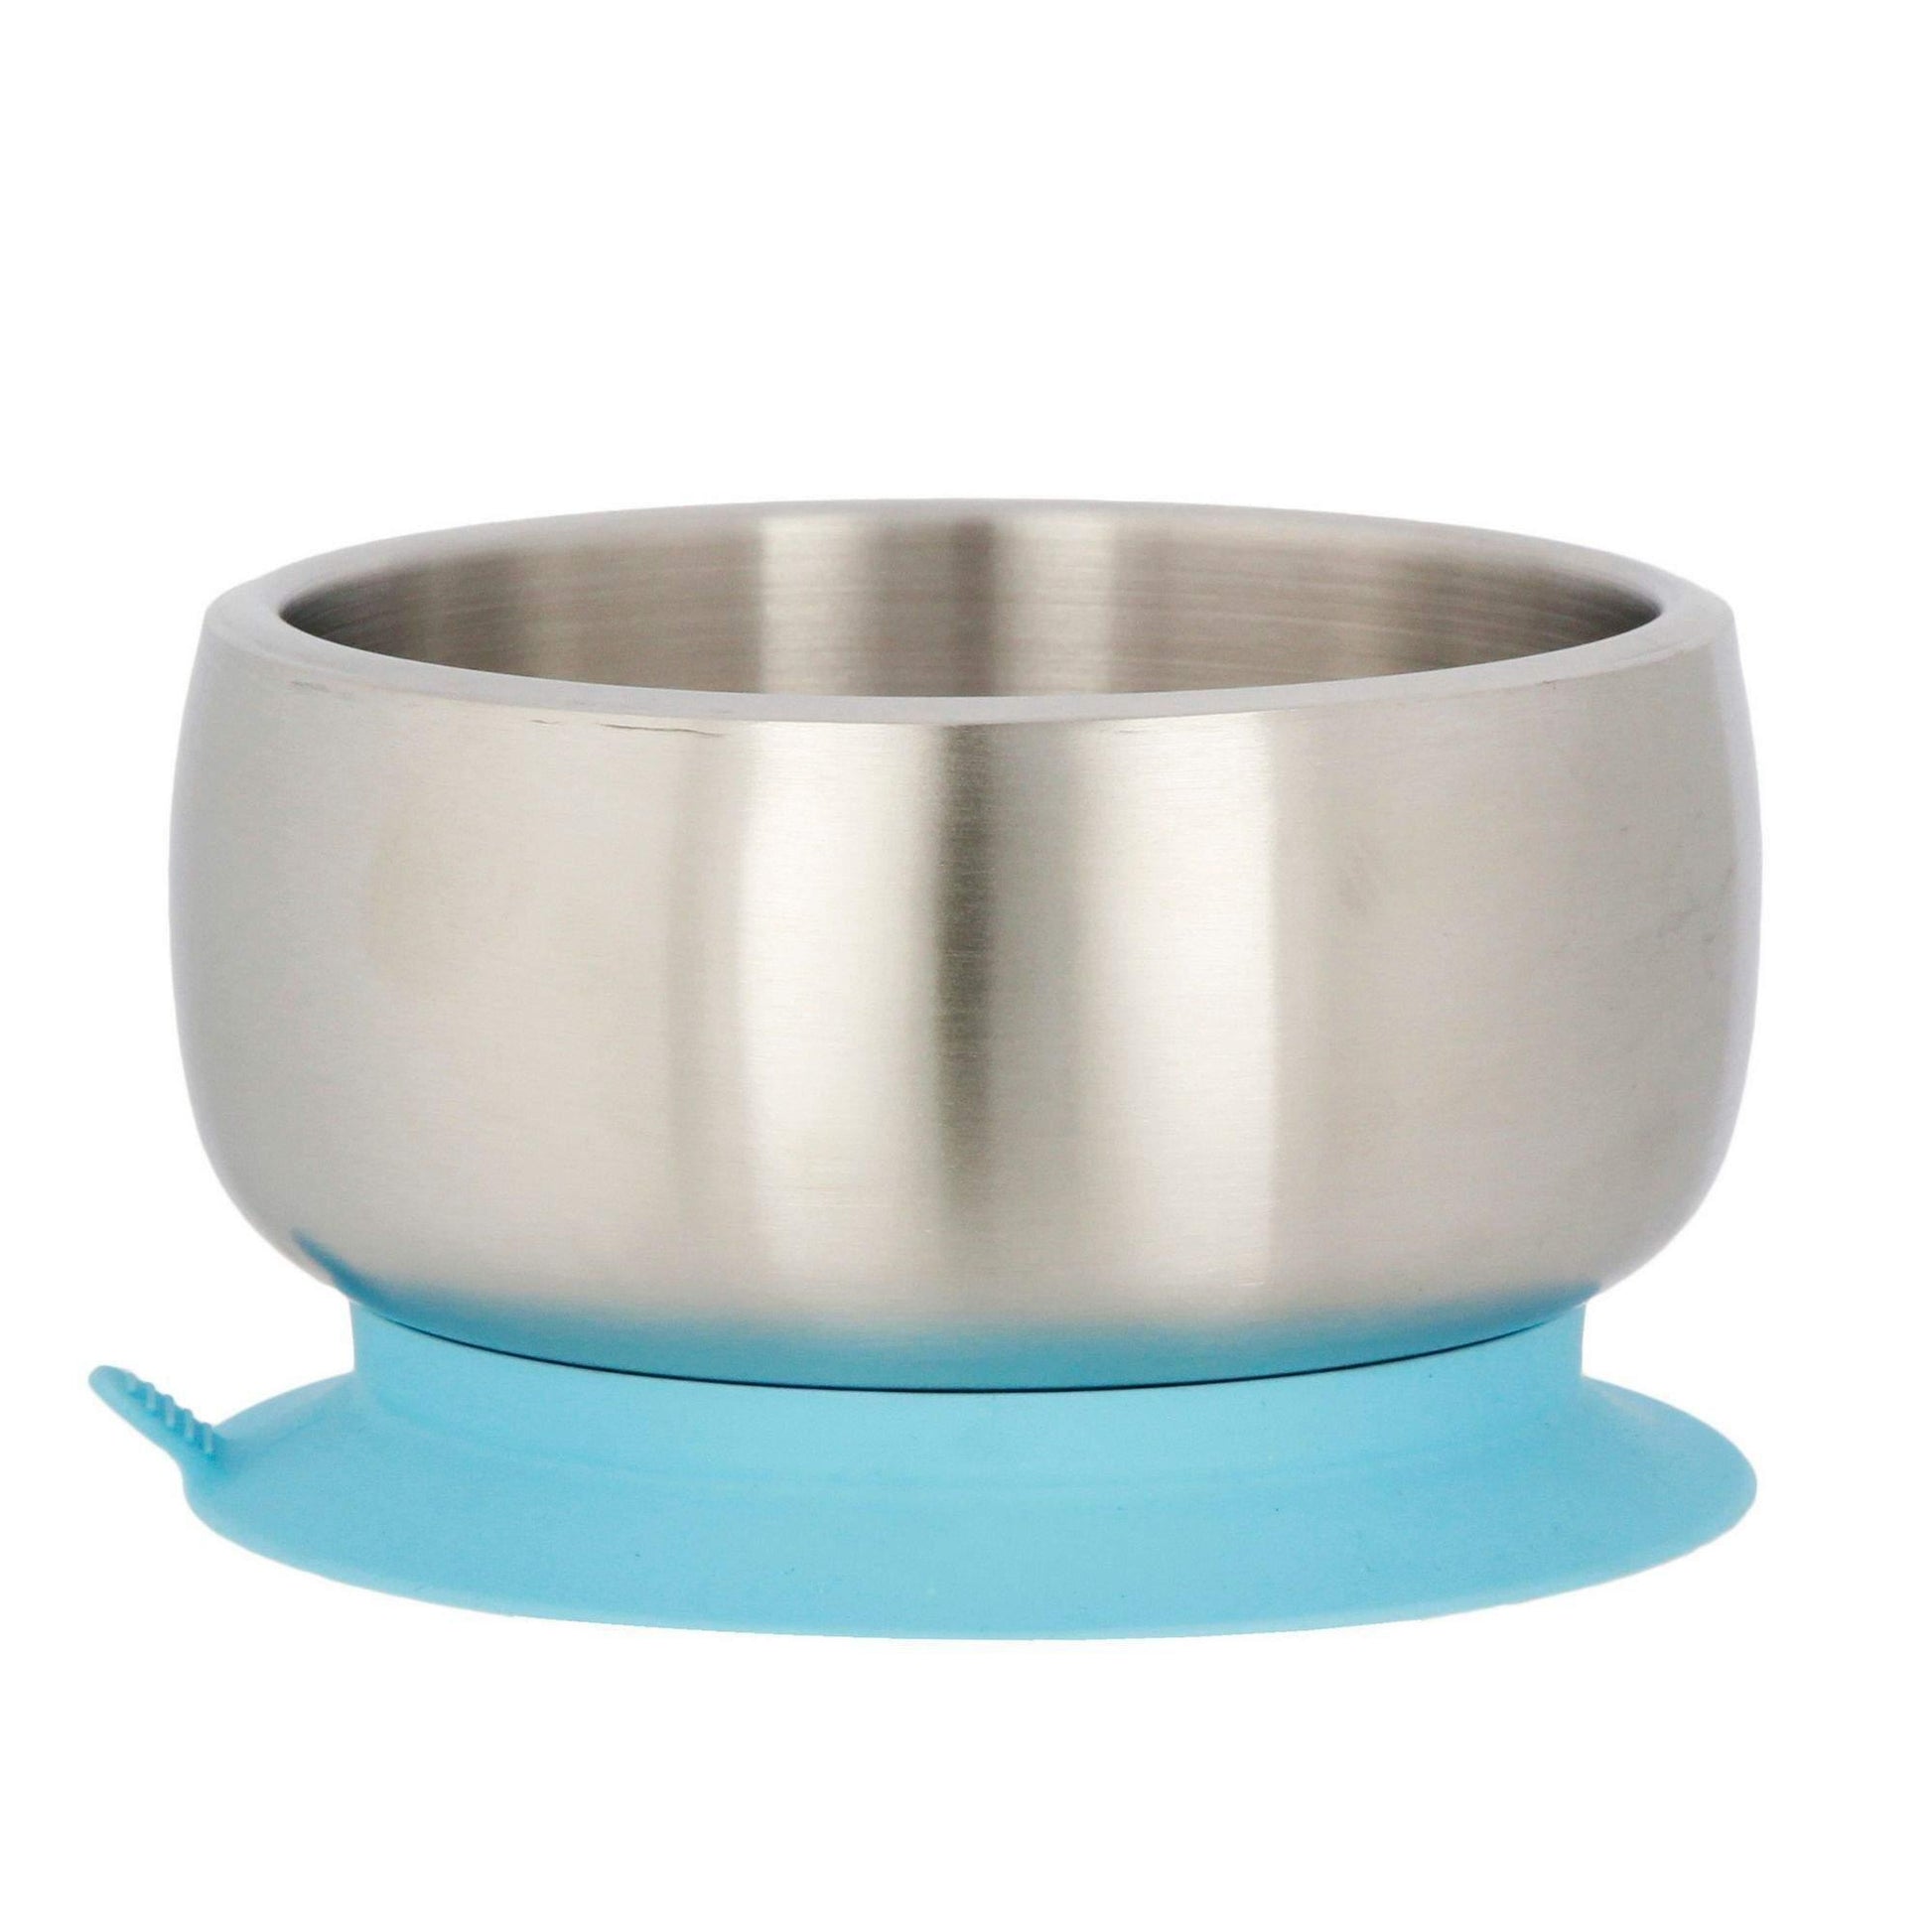 Avanchy Stainless Steel Suction Baby Bowl + Air Tight Lid - Blue - Traveling Tikes 